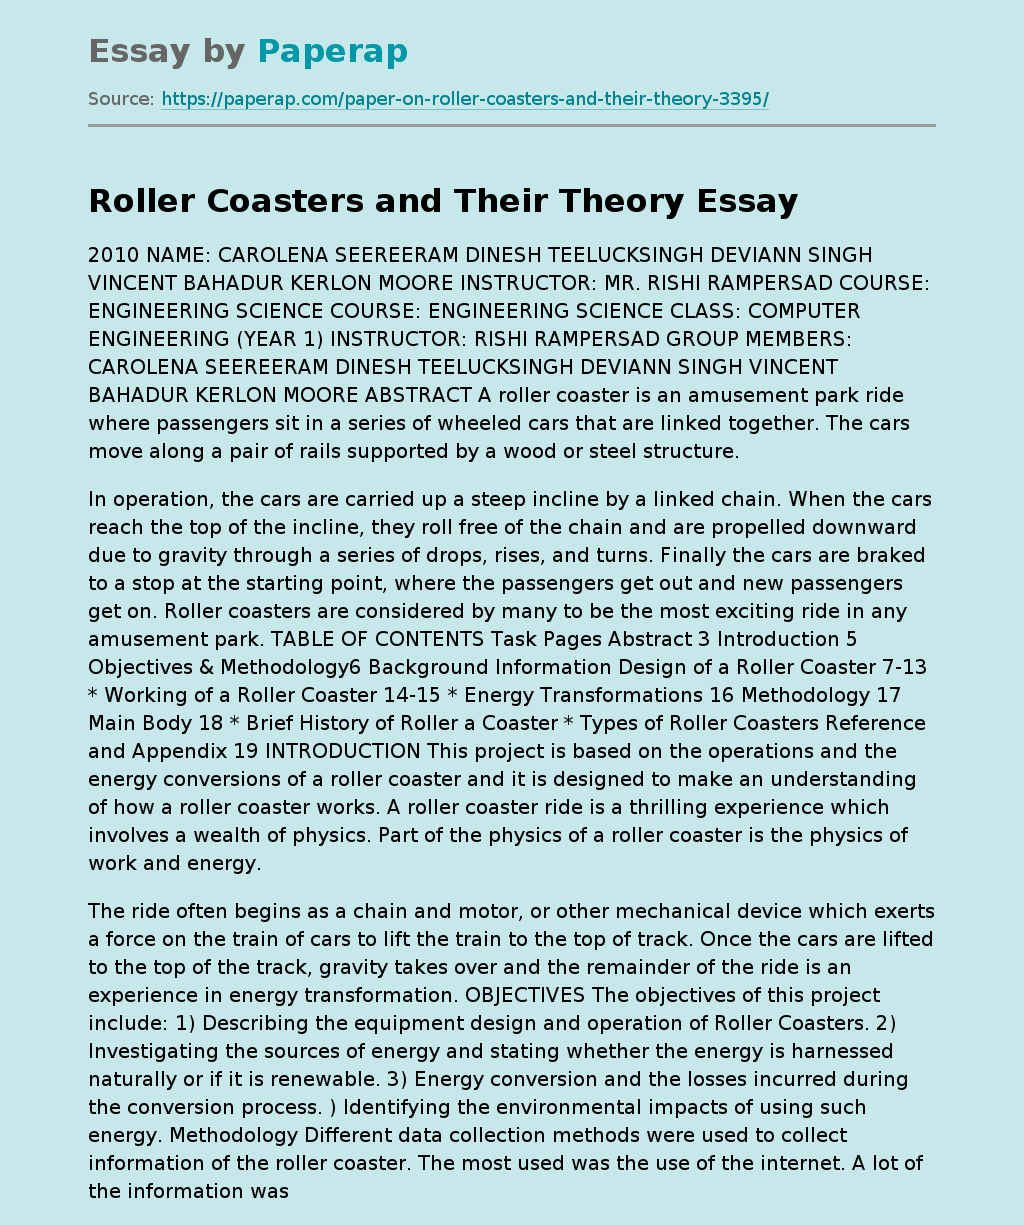 Roller Coasters and Their Theory